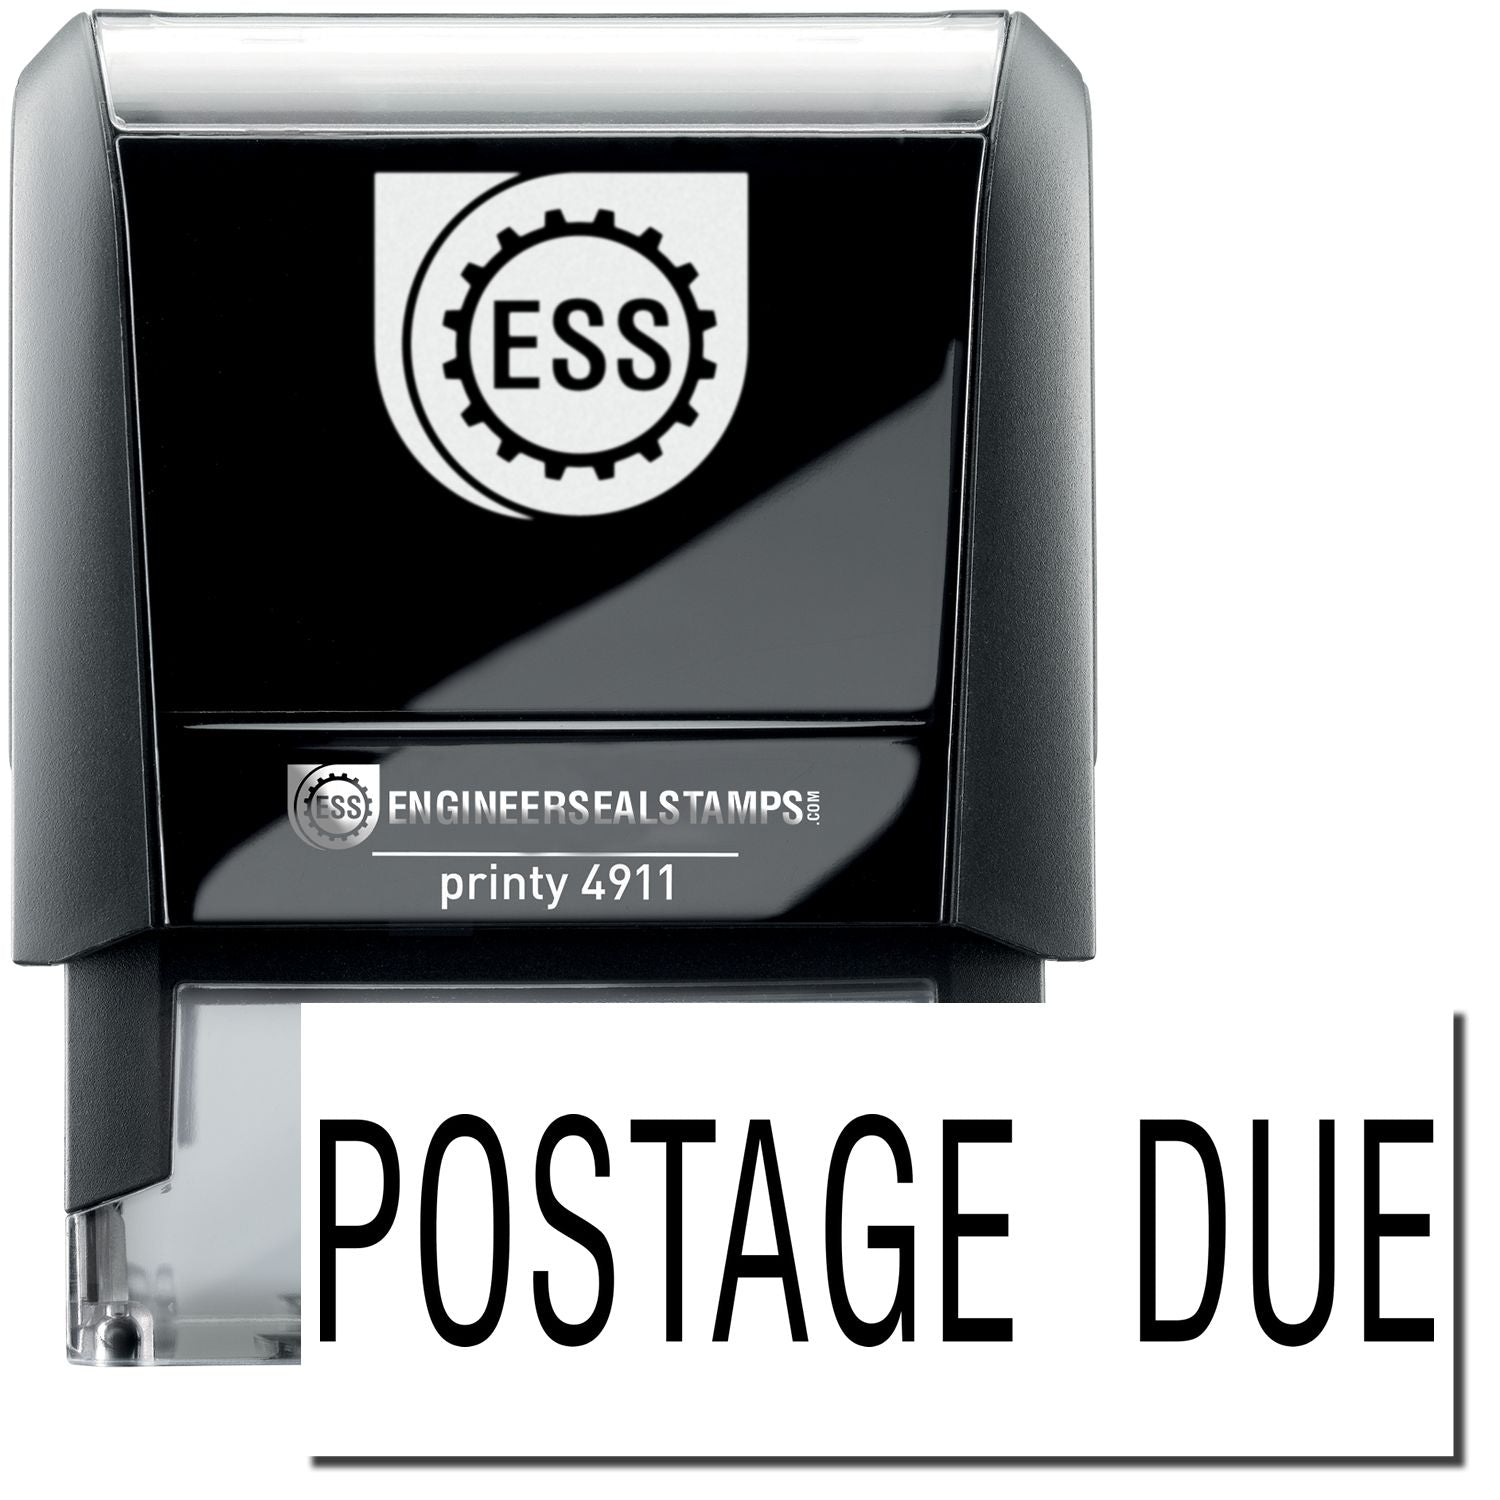 A self-inking stamp with a stamped image showing how the text "POSTAGE DUE" is displayed after stamping.